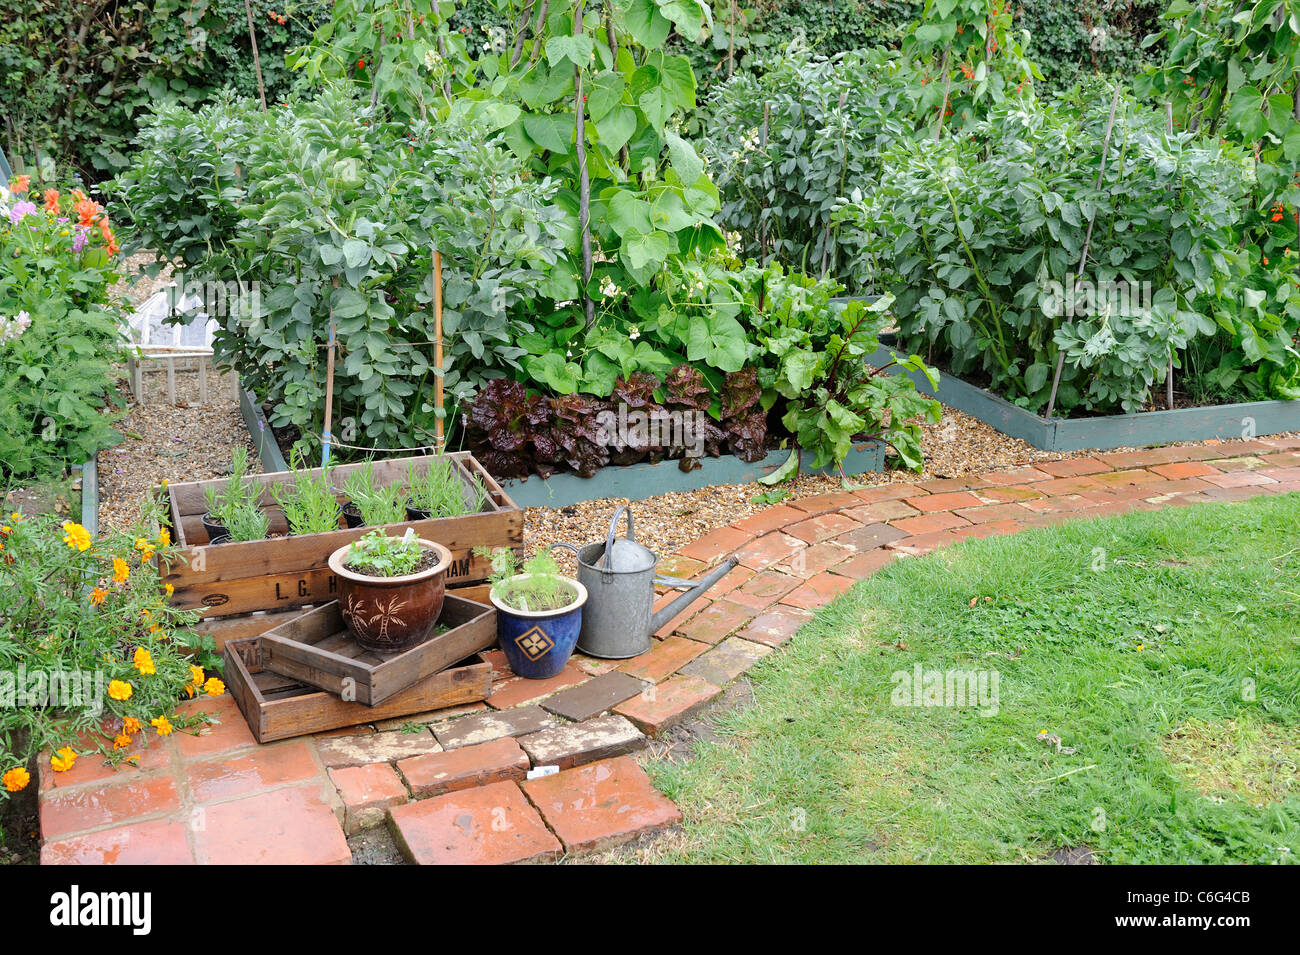 Rustic reclaimed brick path bordering small raised bed vegetable plot, Norfolk, England, July Stock Photo